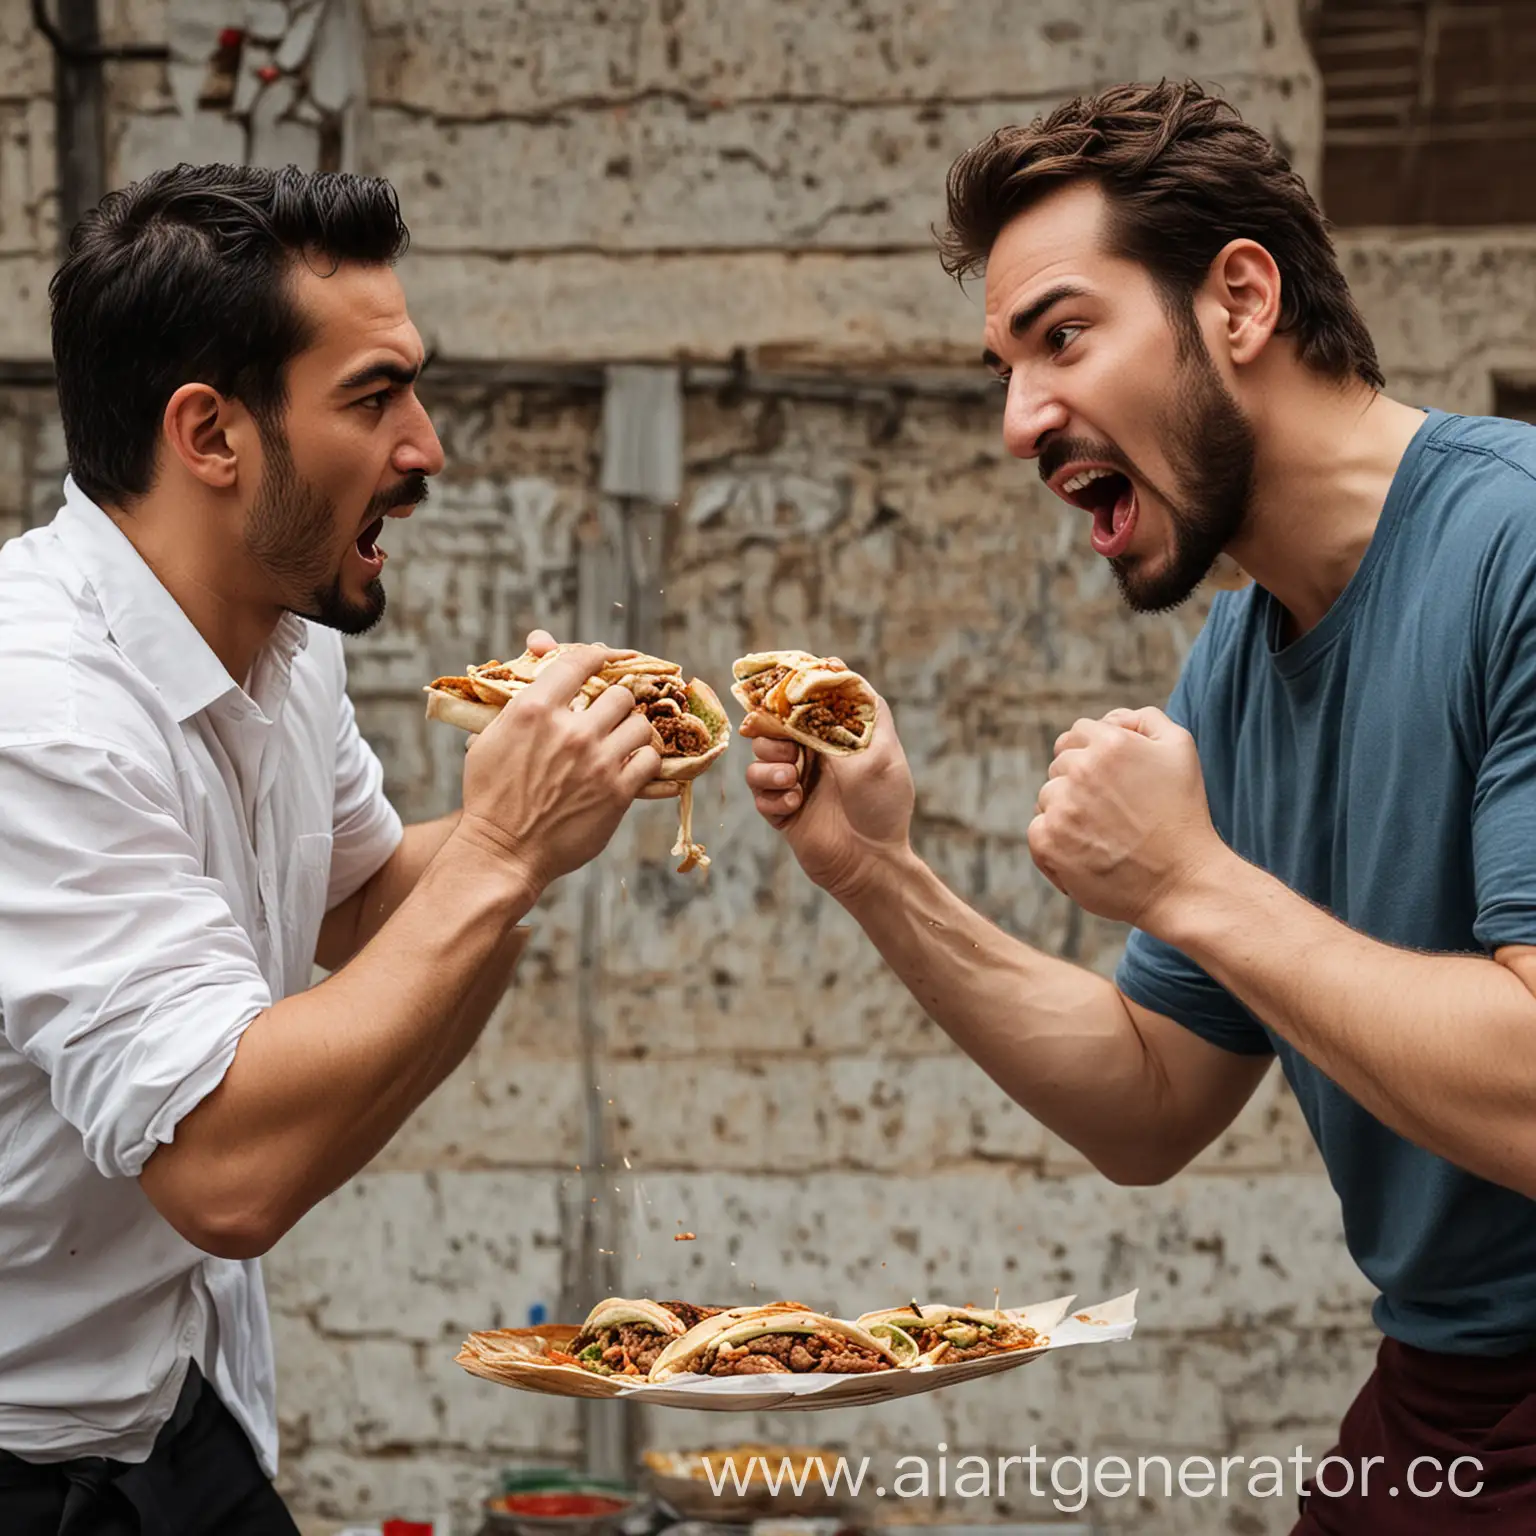 Intense-Conflict-Two-Men-Fighting-Over-Shawarma